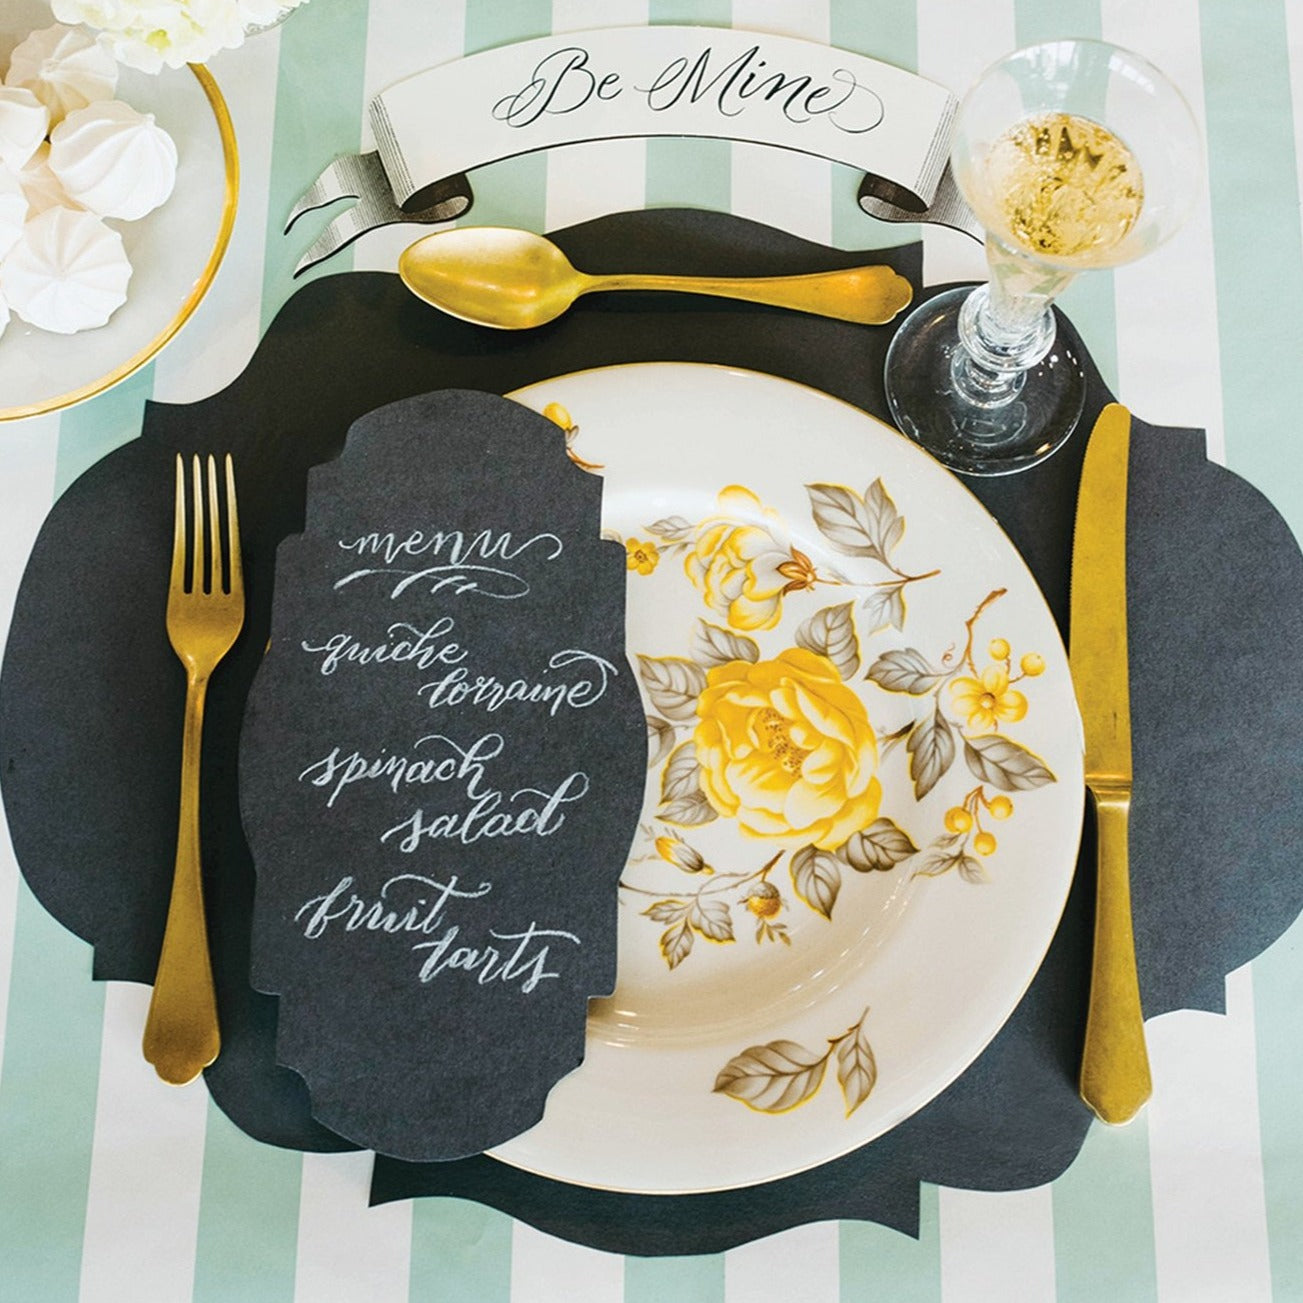 A photograph of the gray french frame placemat in a tablescape. It shows gold silverware and flowered dishes placed on the placemat.